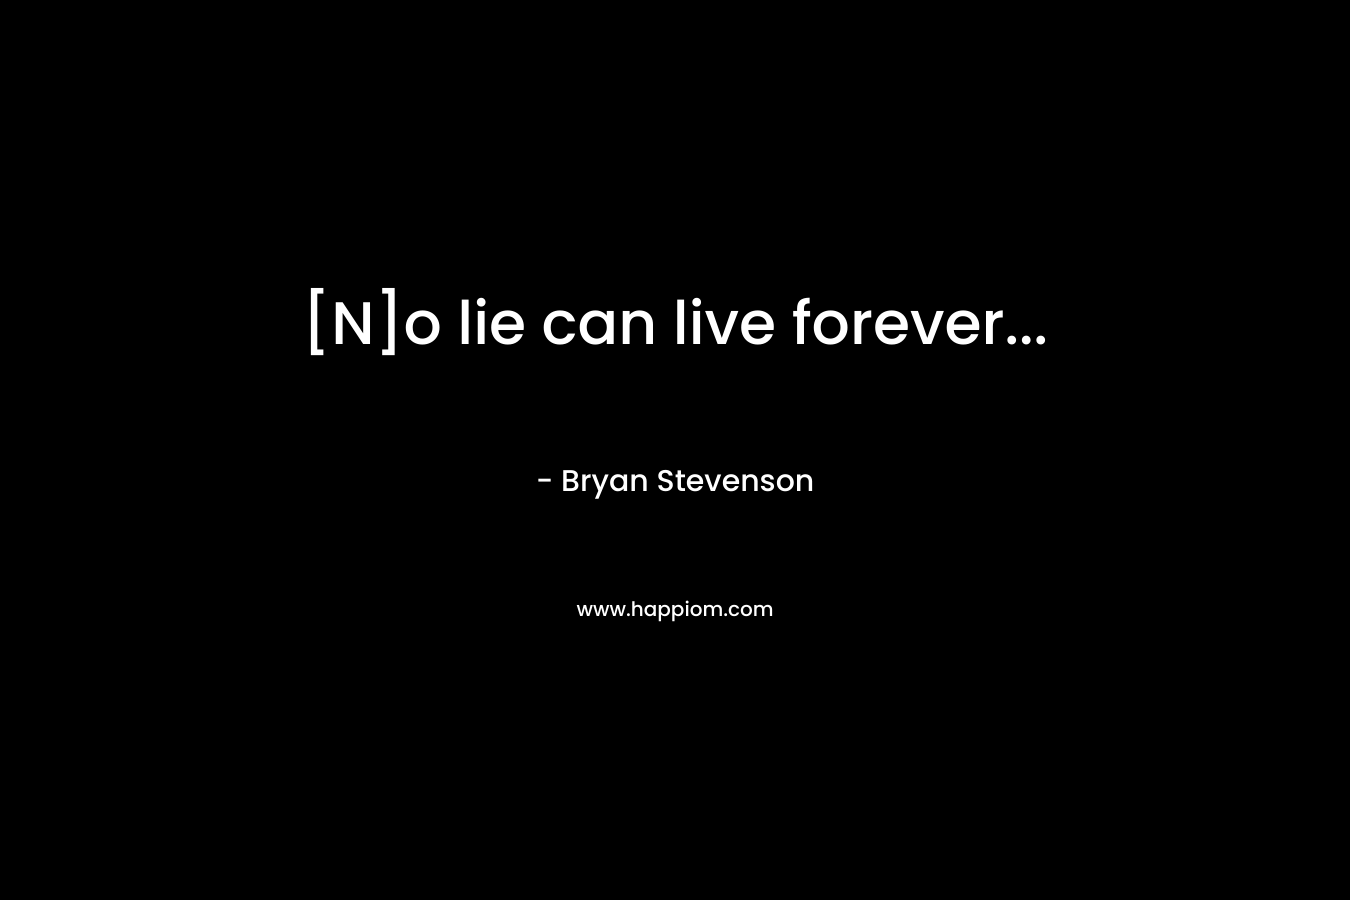 [N]o lie can live forever...